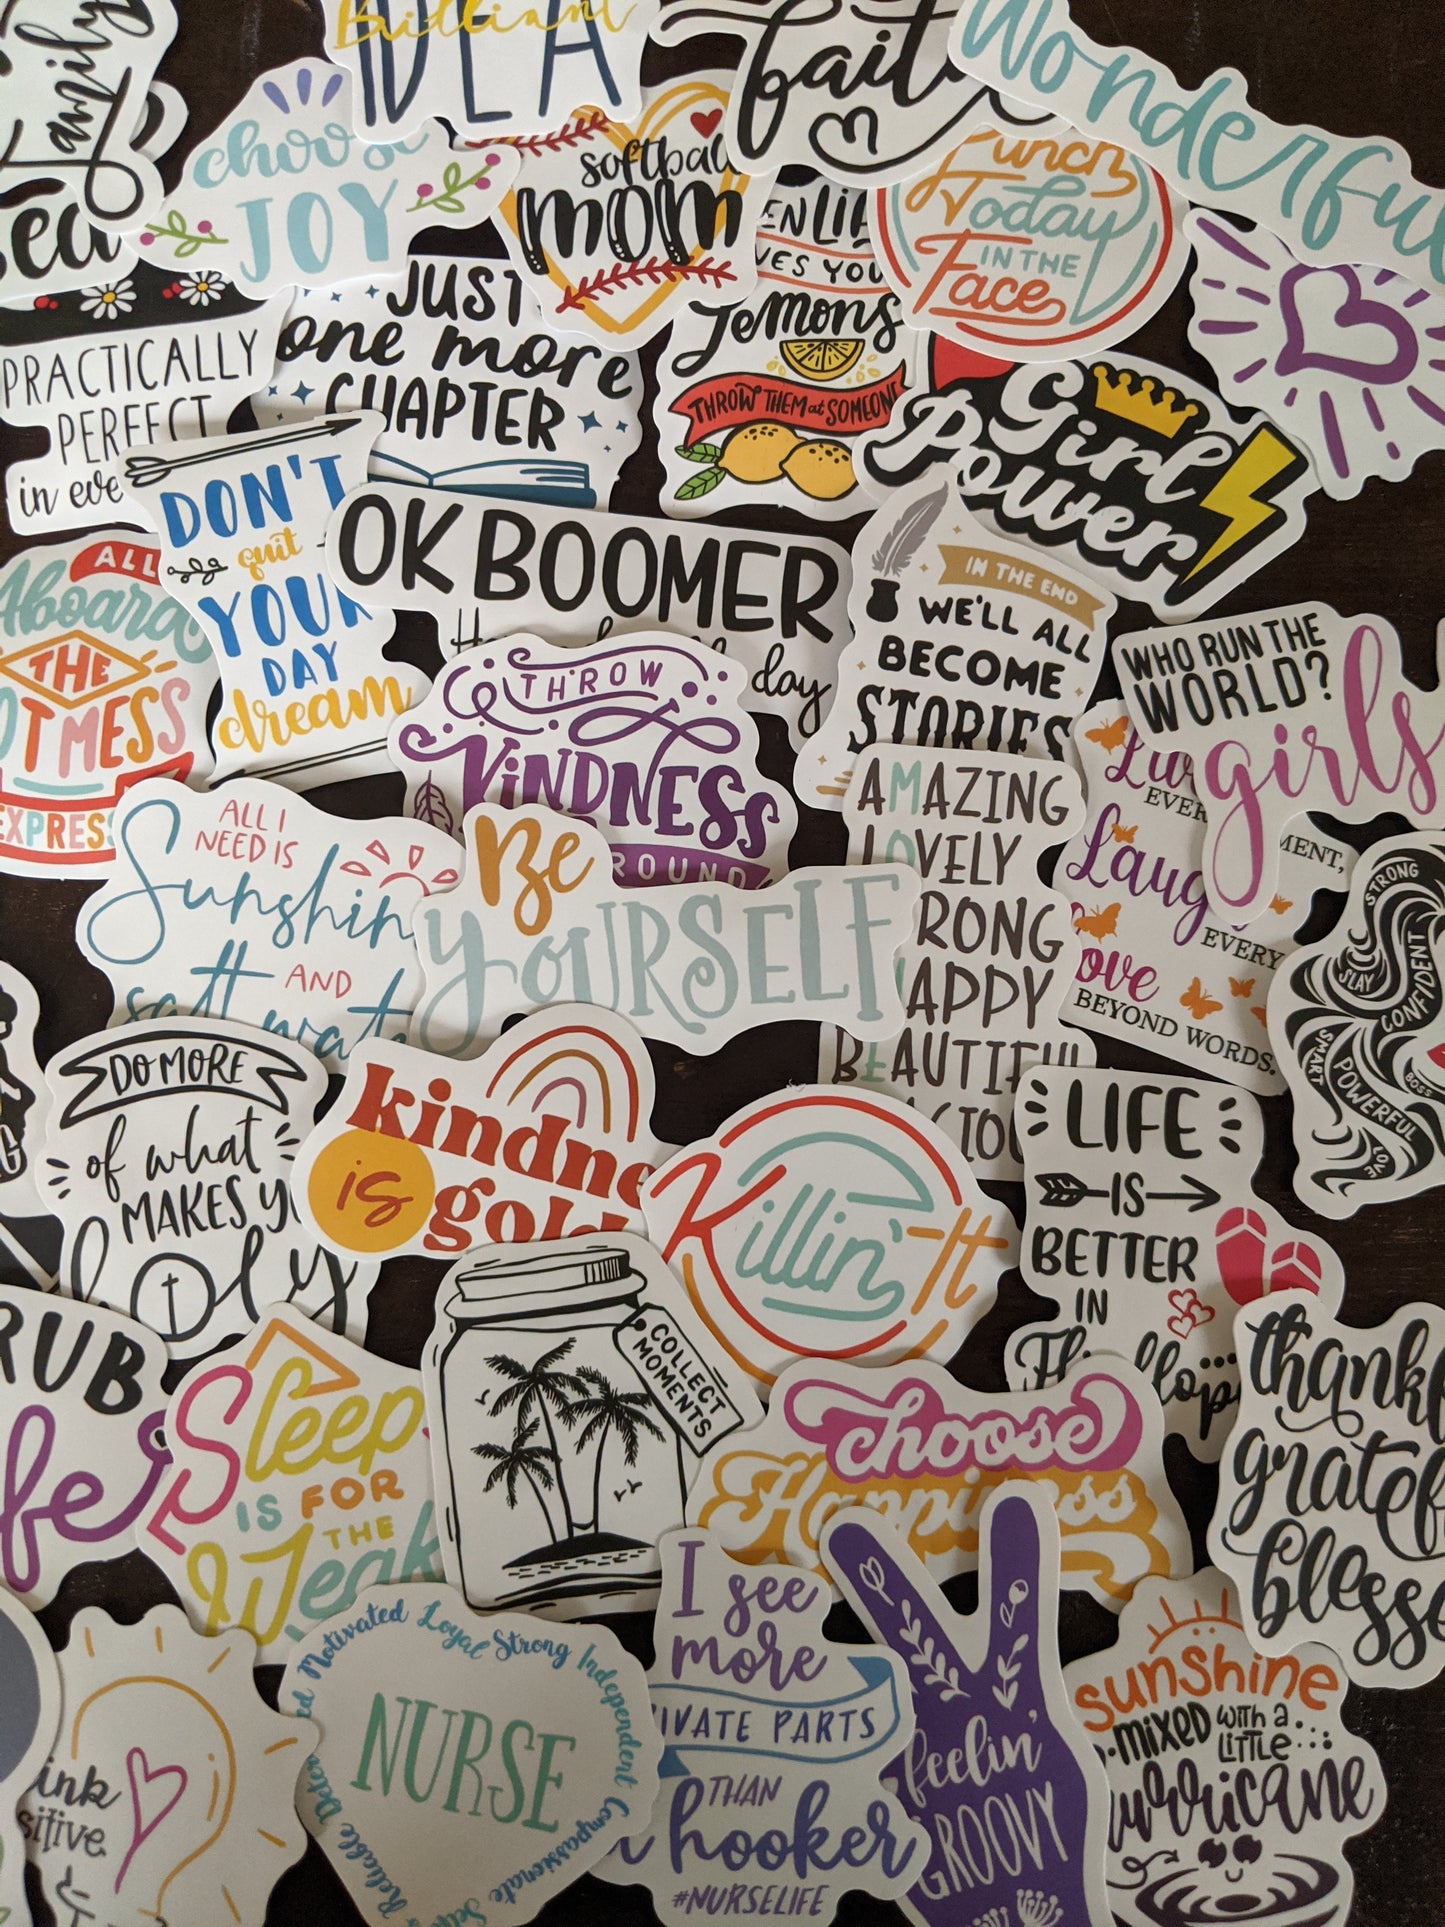 Good Times Sayings Sticker Pack